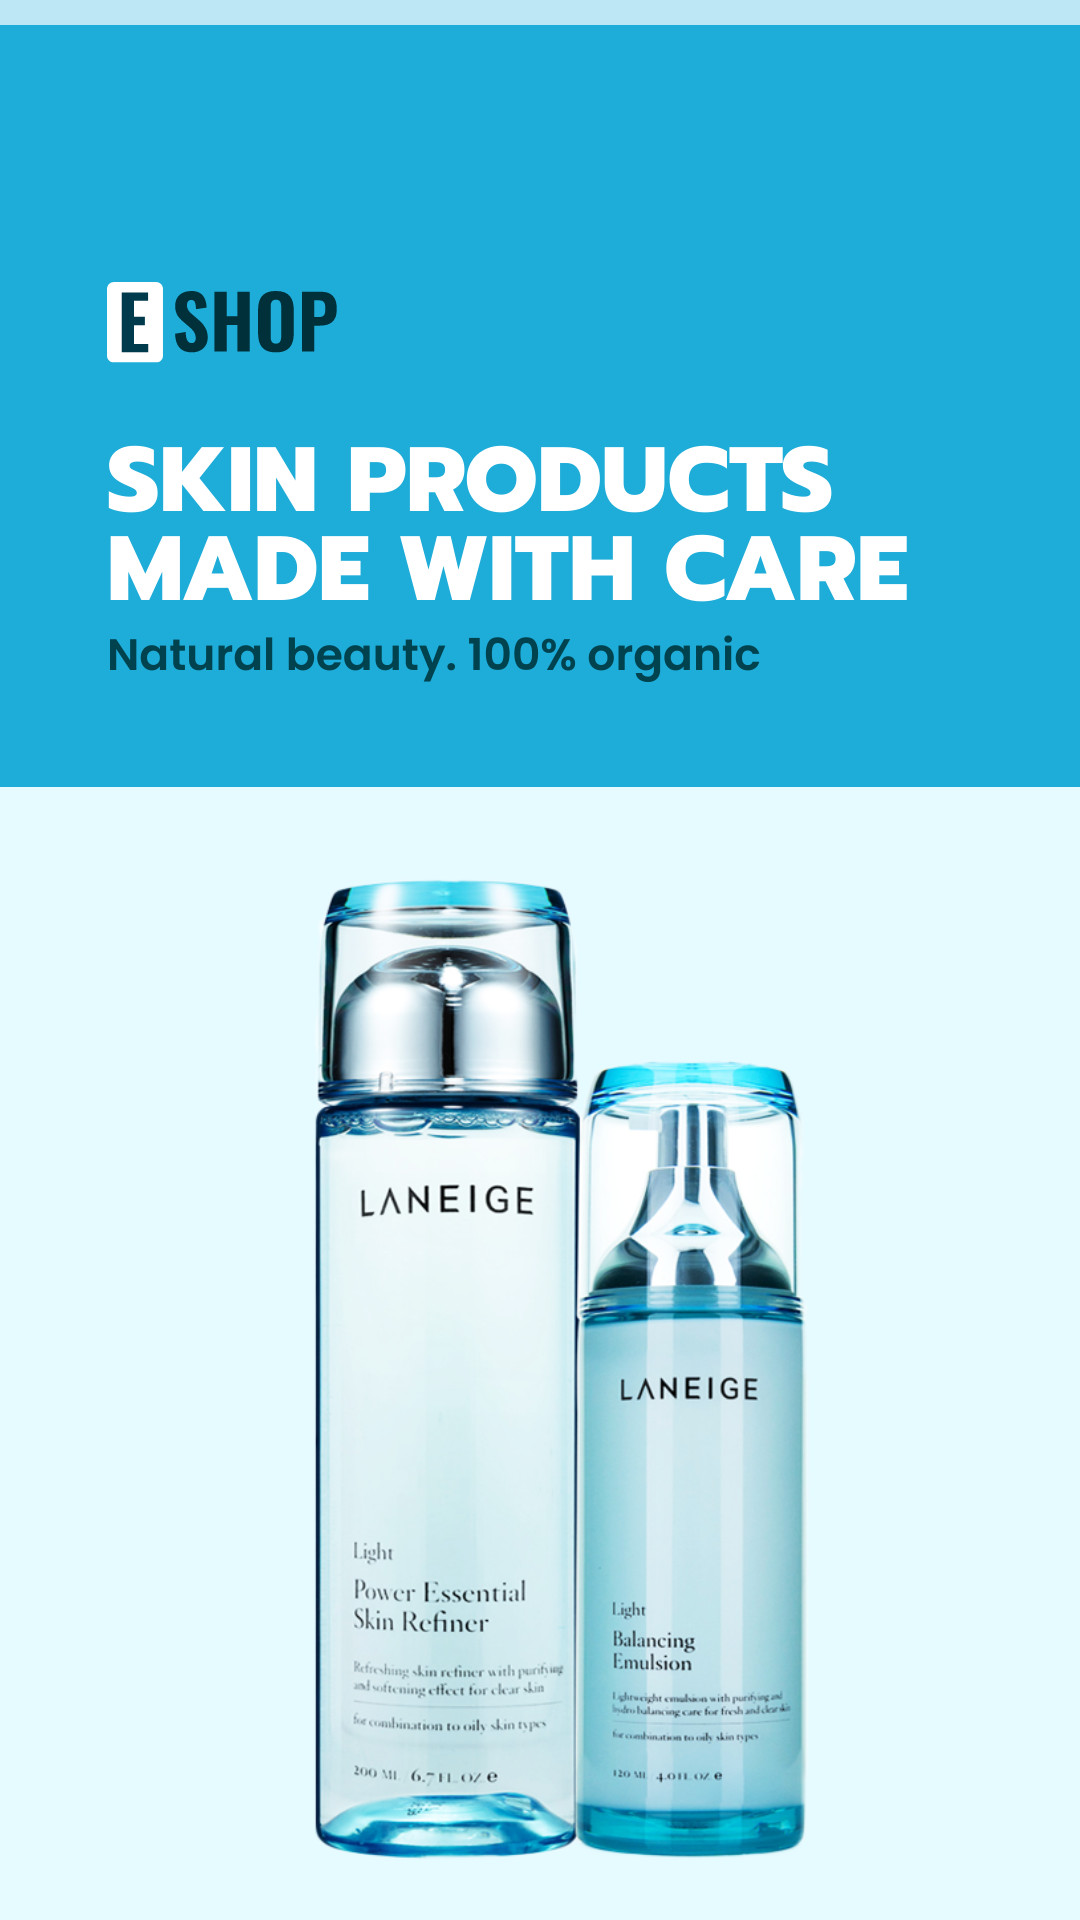 Skin Products Made with Care